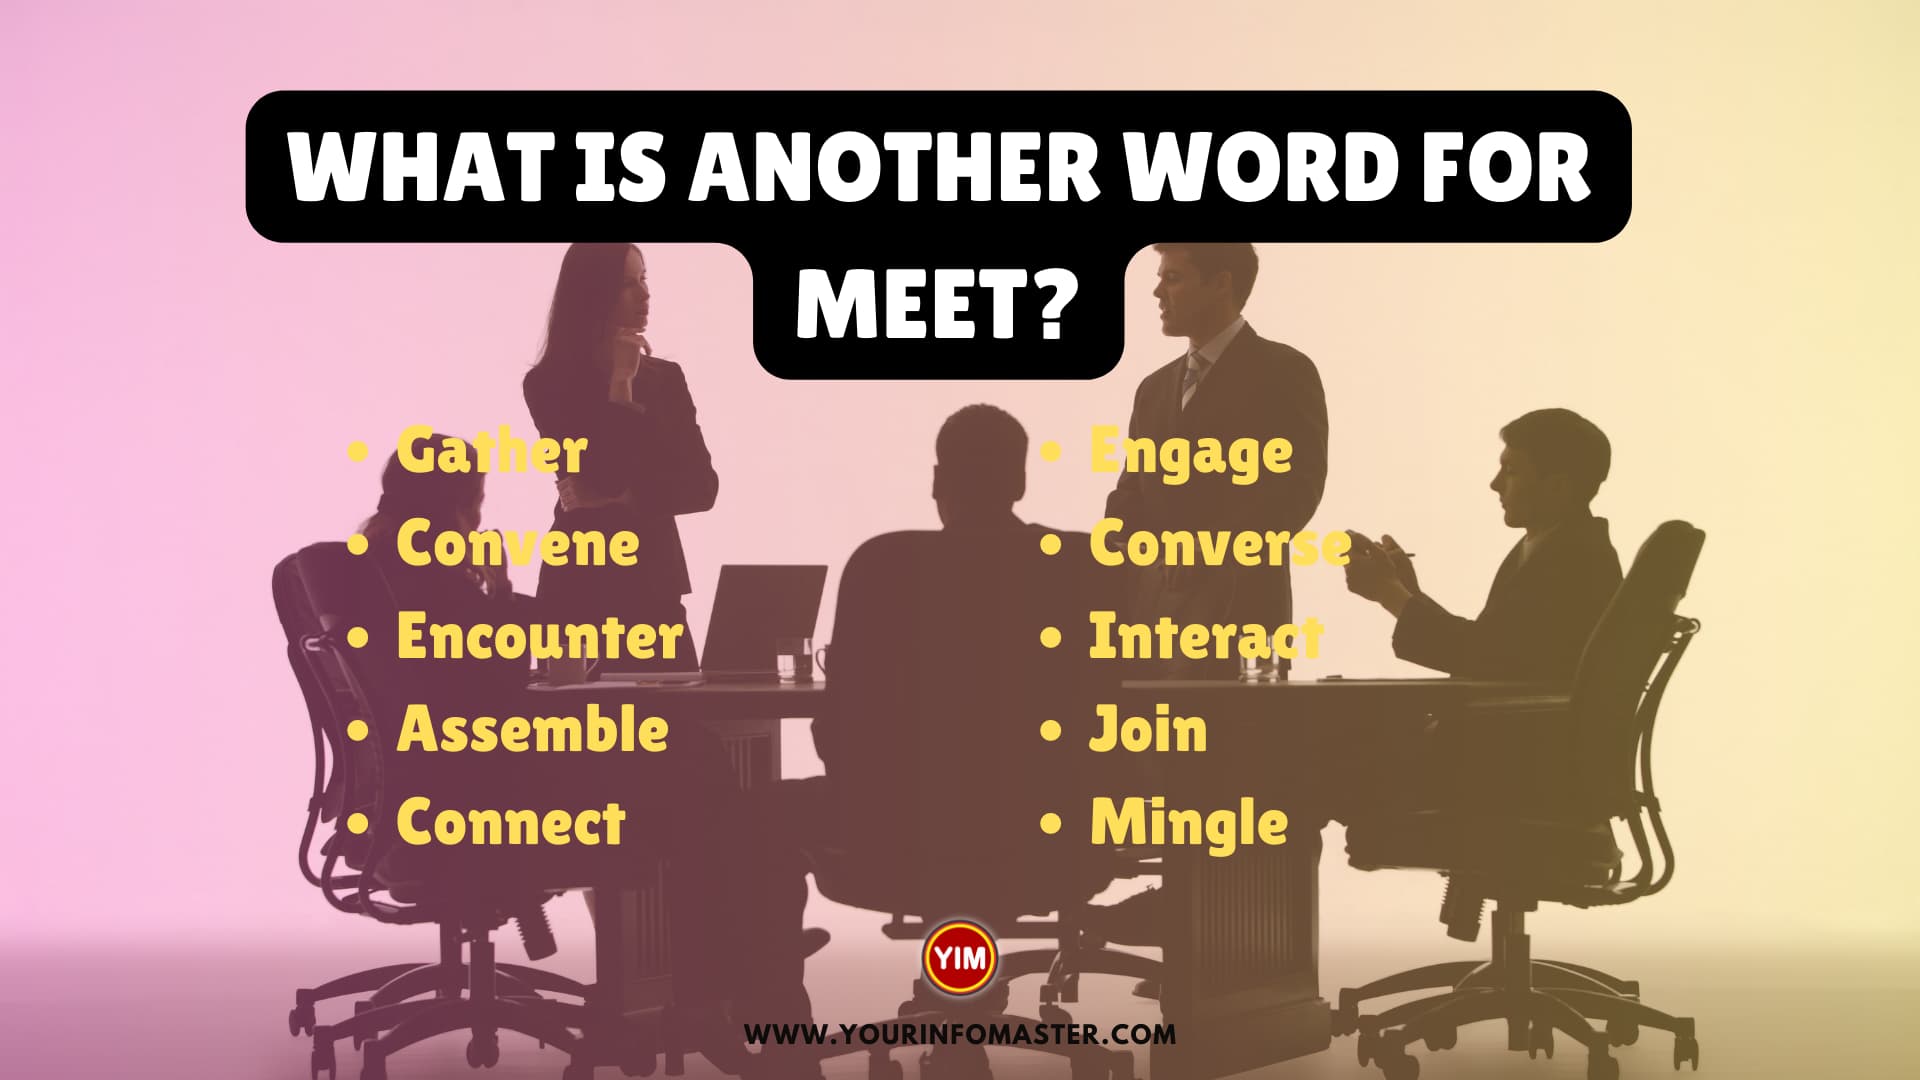 What is another word for Meet